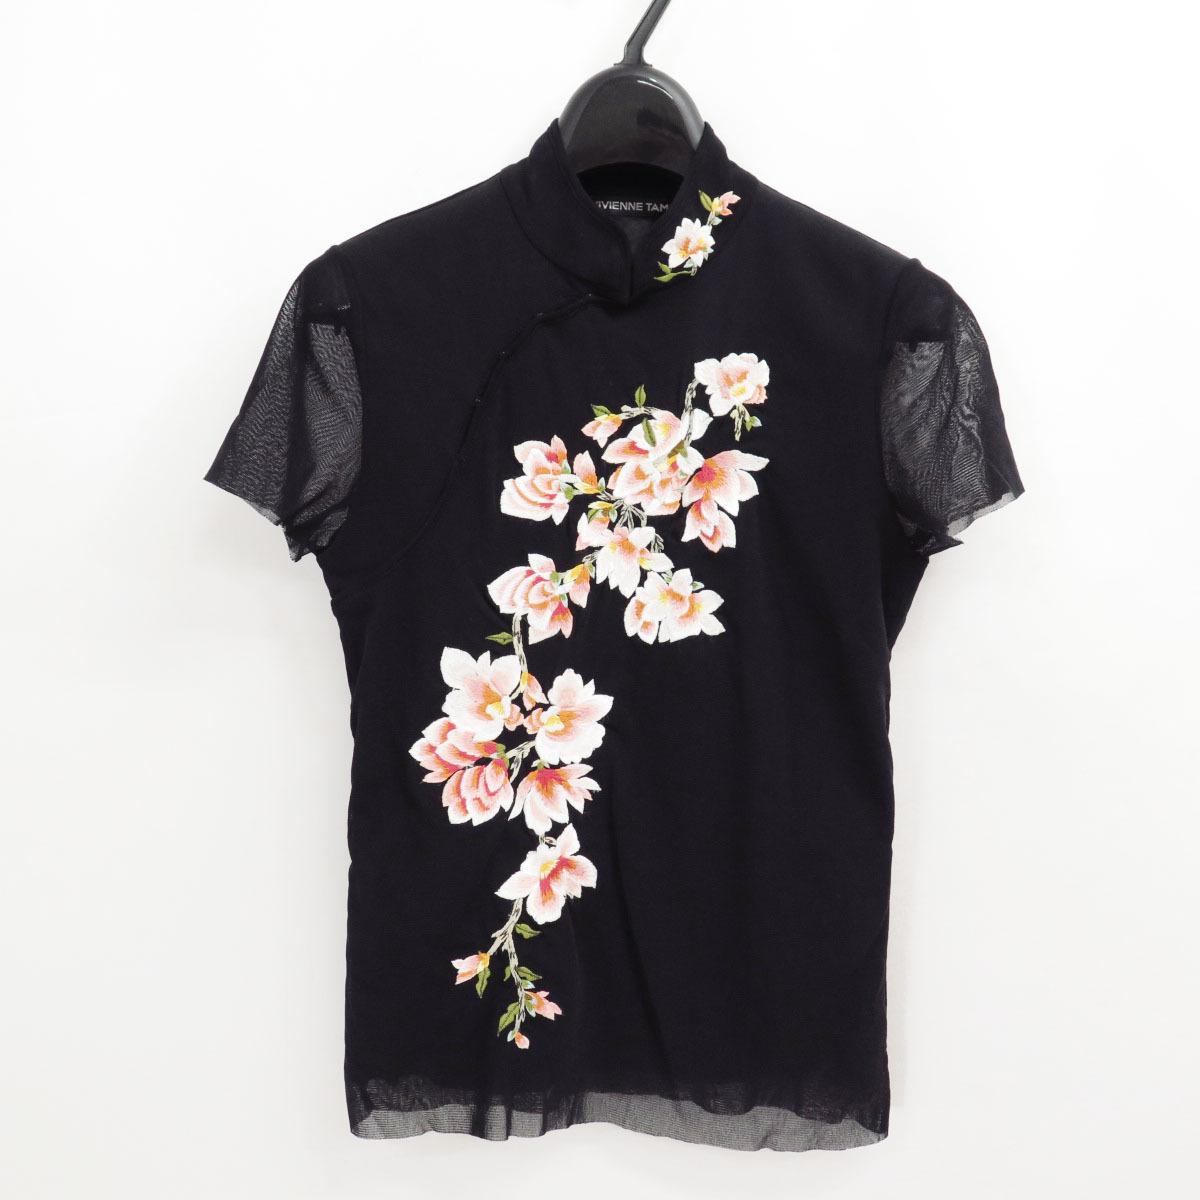 VIVIENNE TAM FLORAL EMBROIDERED MESH TOP ARCHIVE ヴィヴィアンタム フラワー メッシュ パワーネット トップス アーカイブ 花 刺繍の画像1